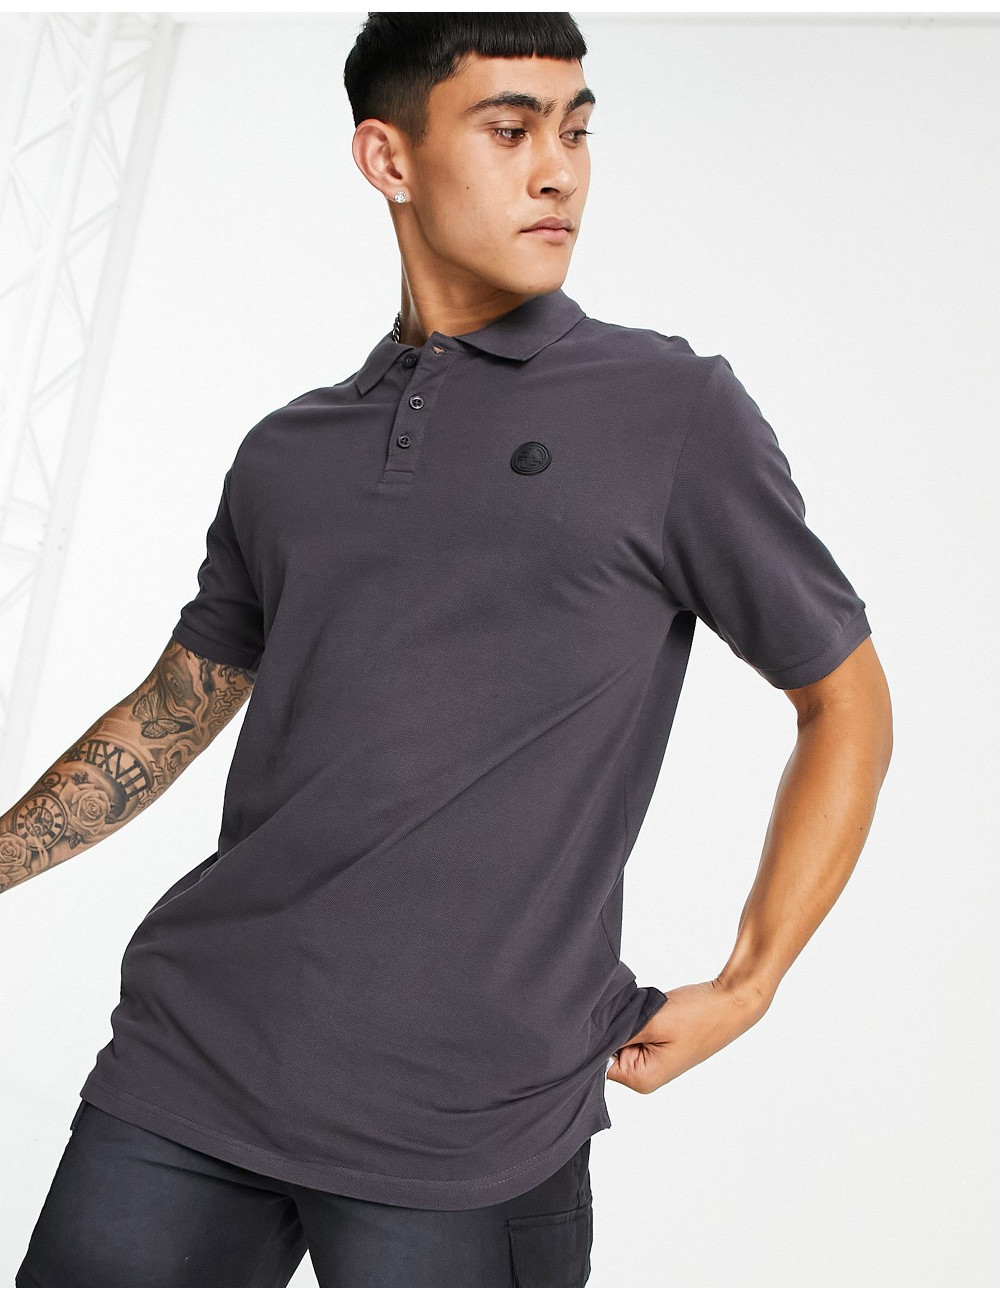 Soul Star polo in charcoal